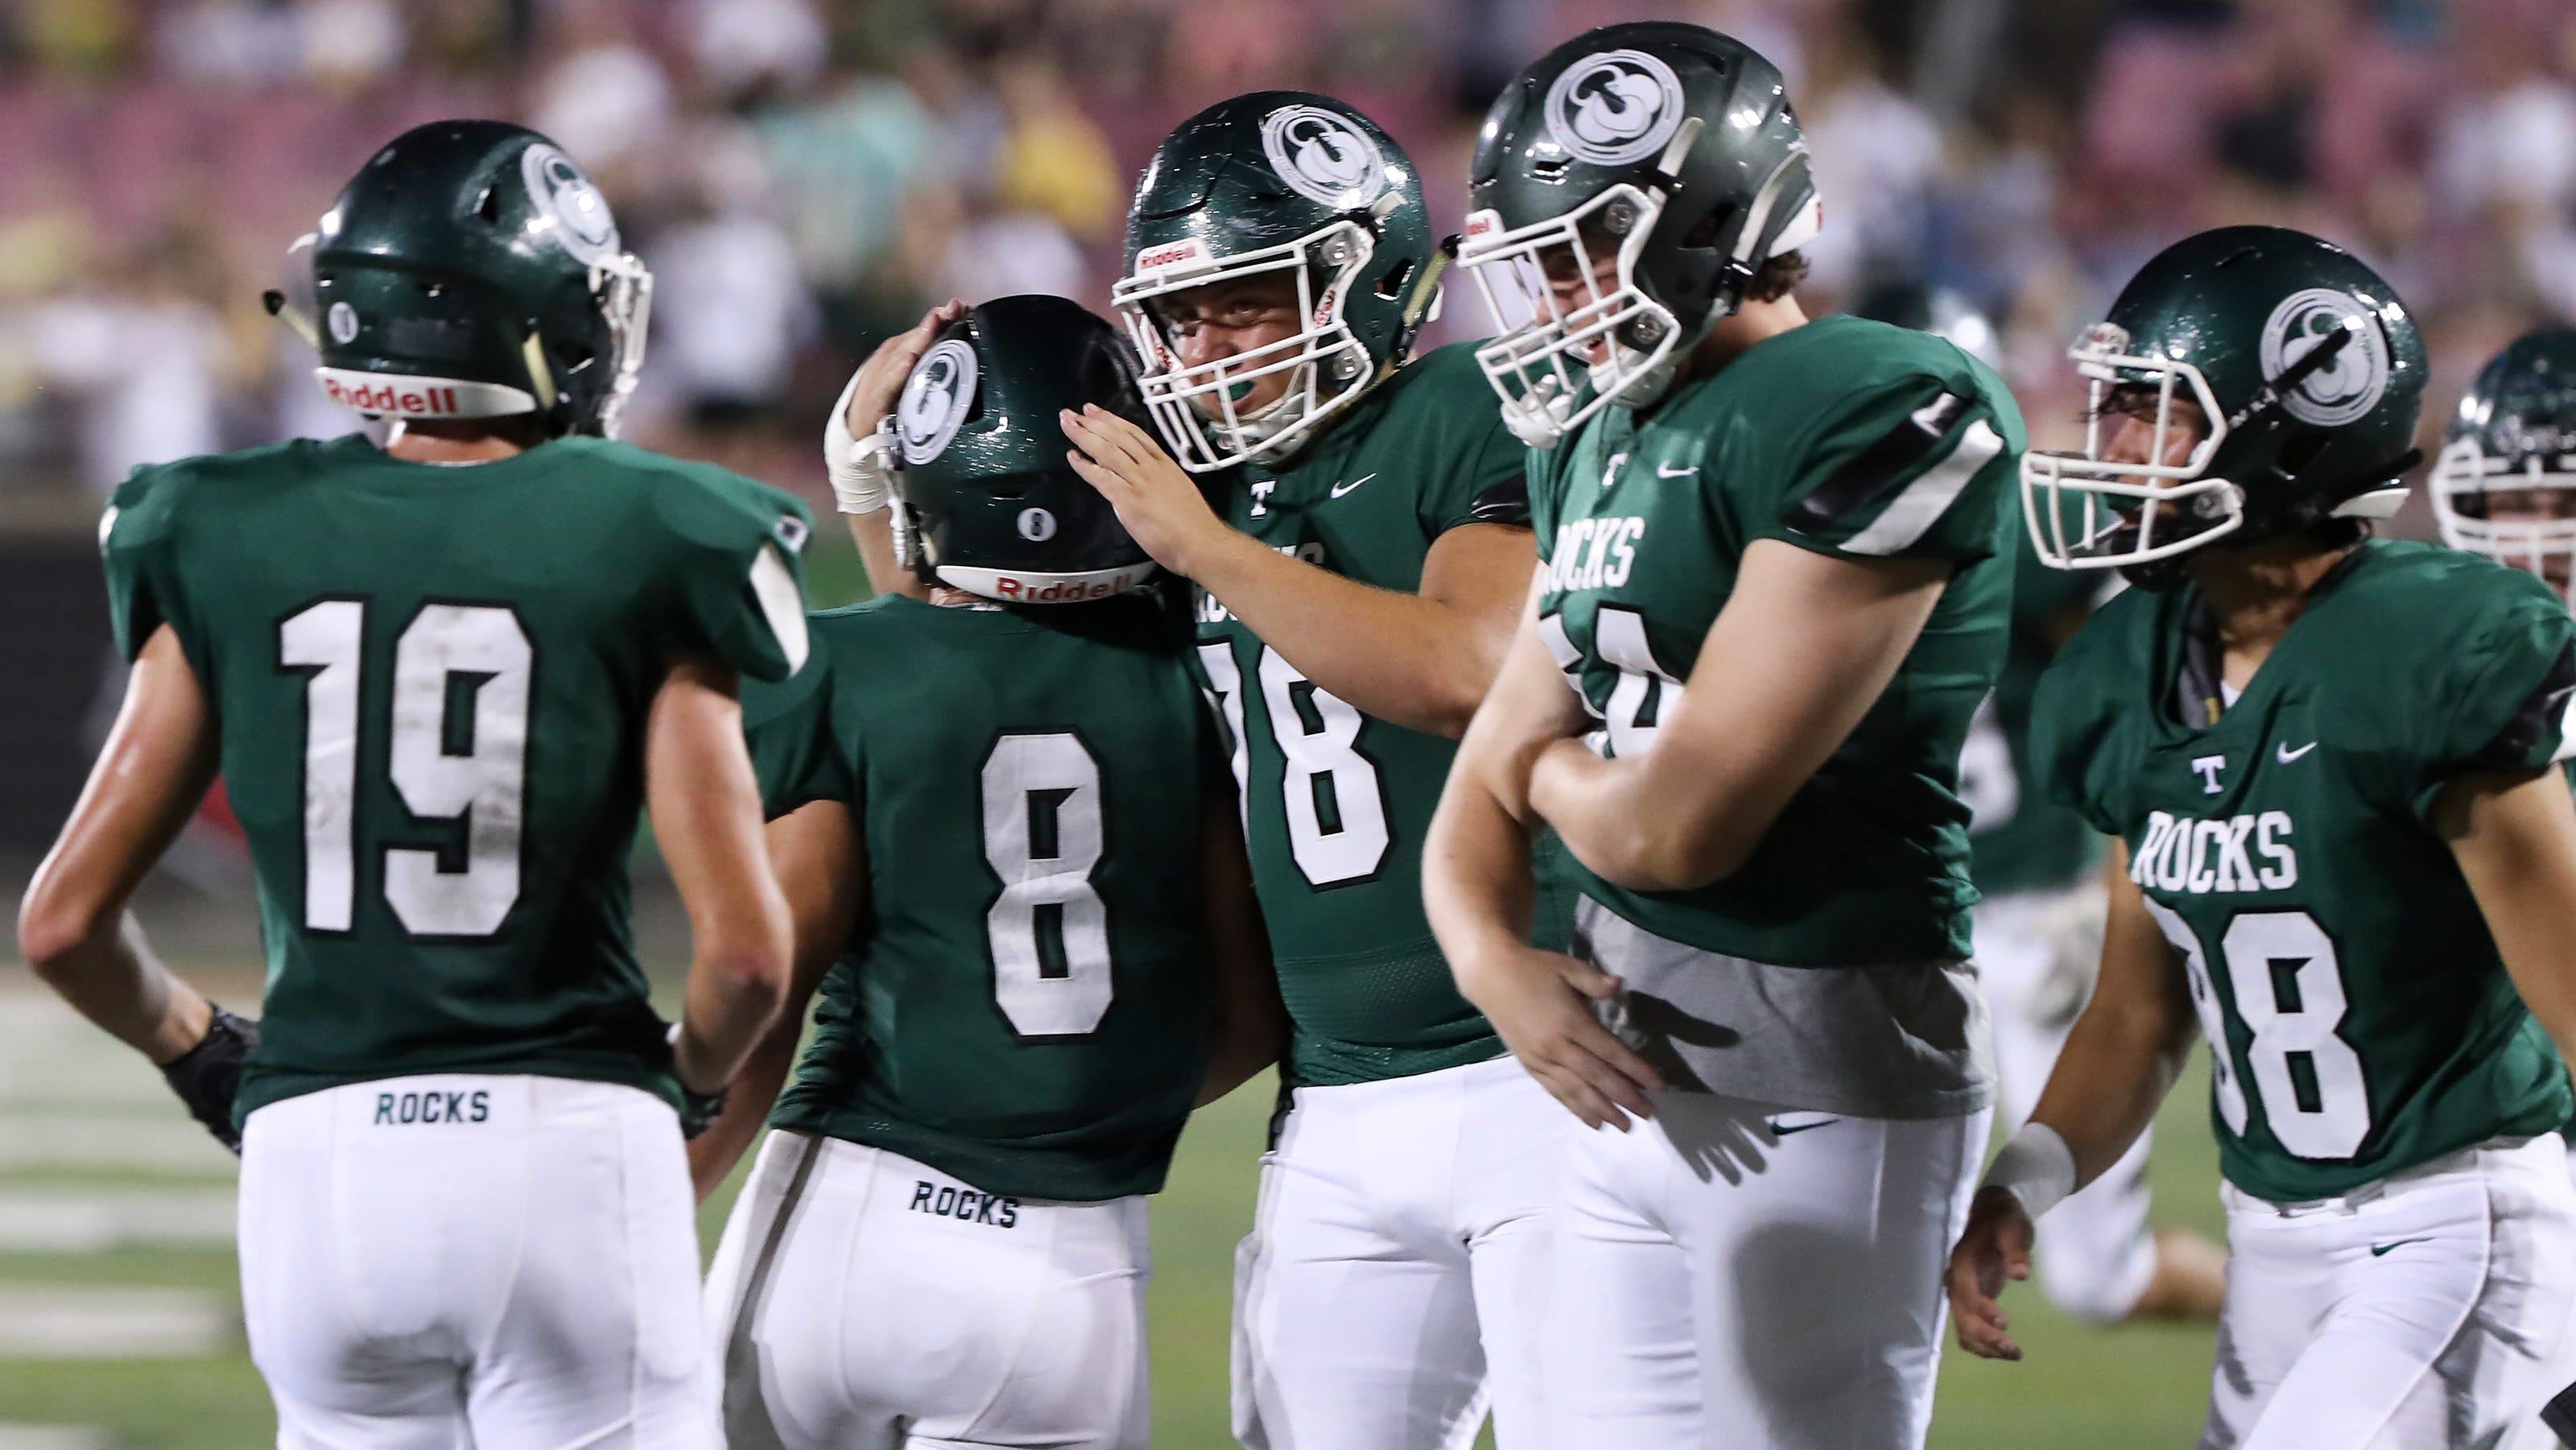 Trinity High School football dominates with defense in win over St. X